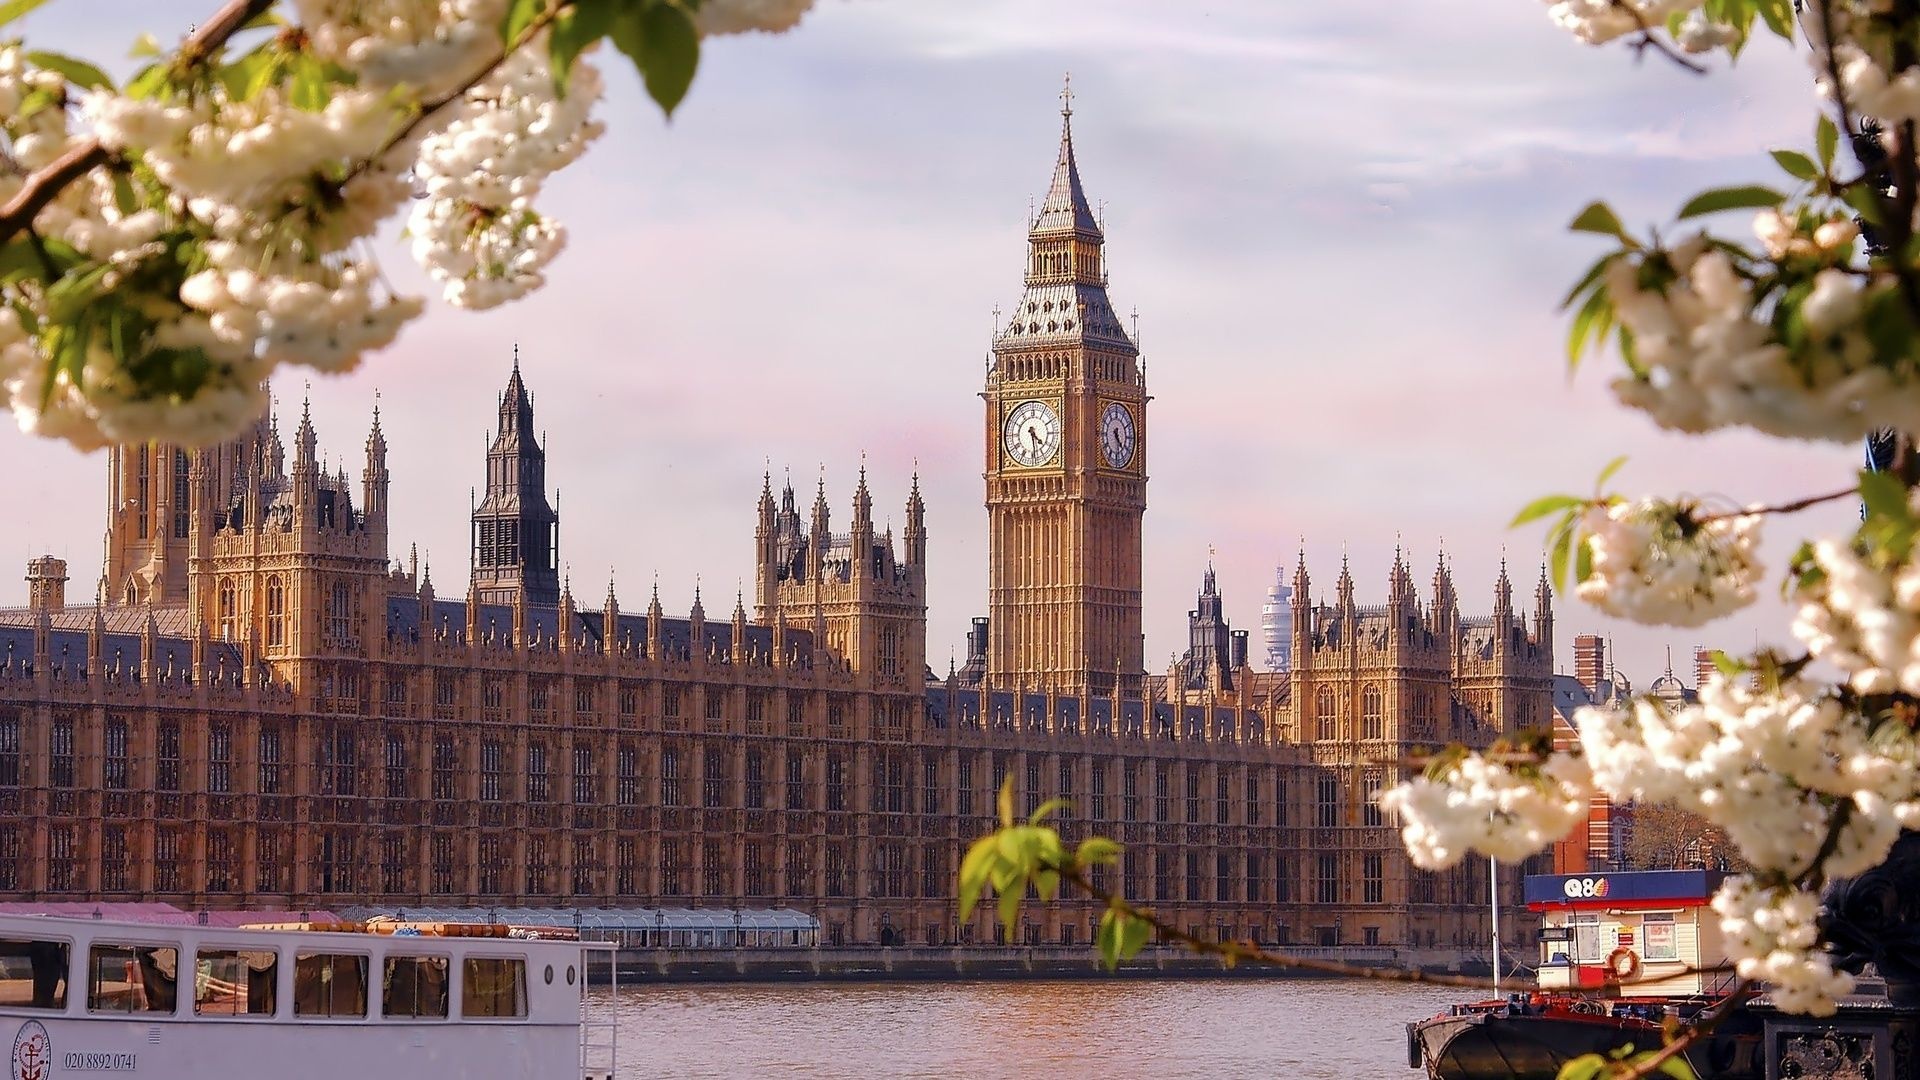 London: Palace of Westminster, Tower, Clock, Body of water. 1920x1080 Full HD Background.